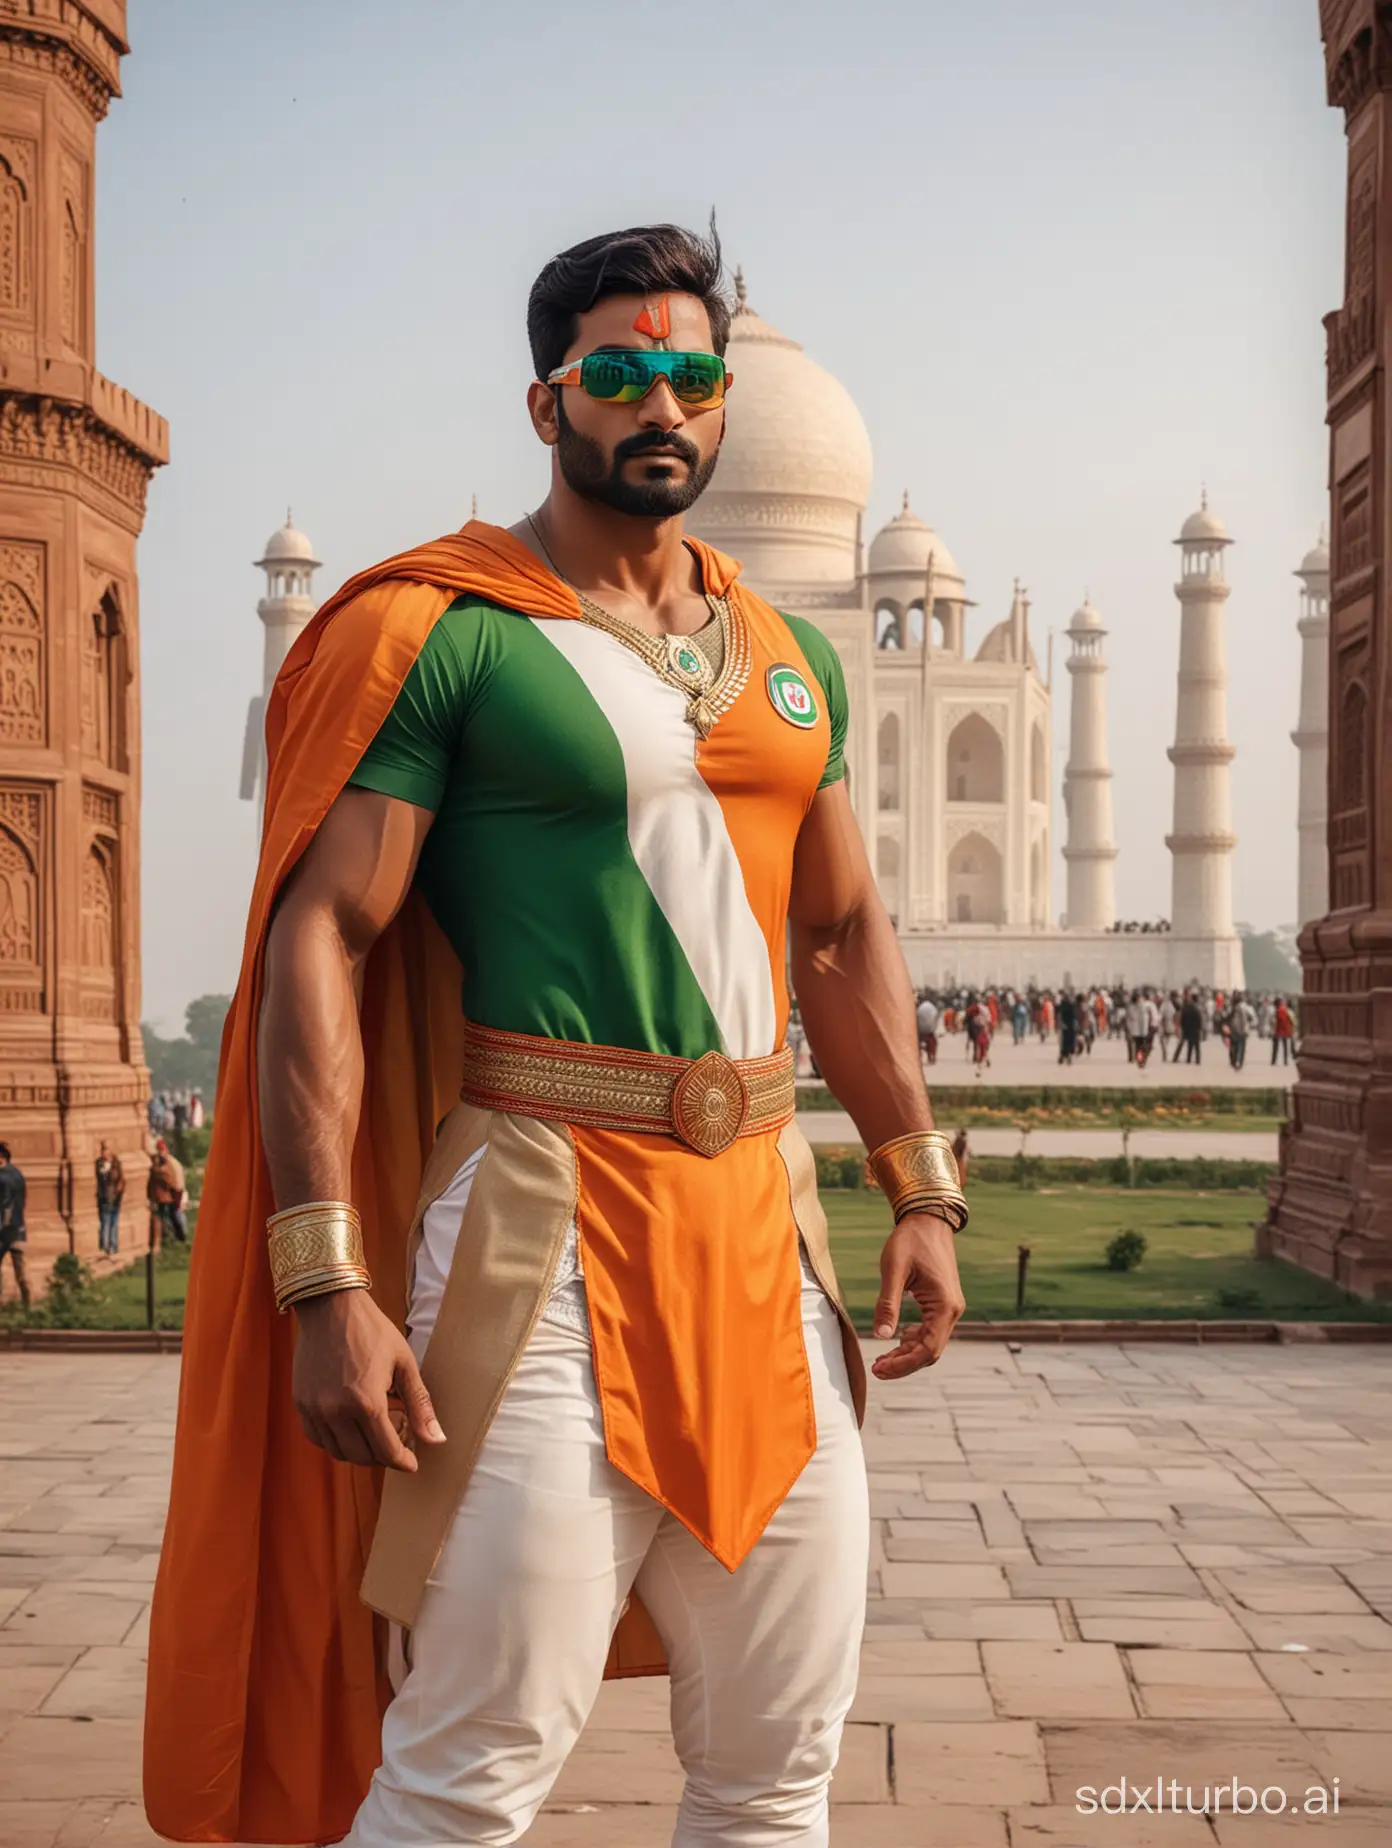 Create an indian superhero with costume based on indian flag colours and indian flag logo on chest. The costume should have 60% orange, 30% white and 10% green. The costume should have armour and superhero should have good muscles.
Superhero is standing near Tajmahal.